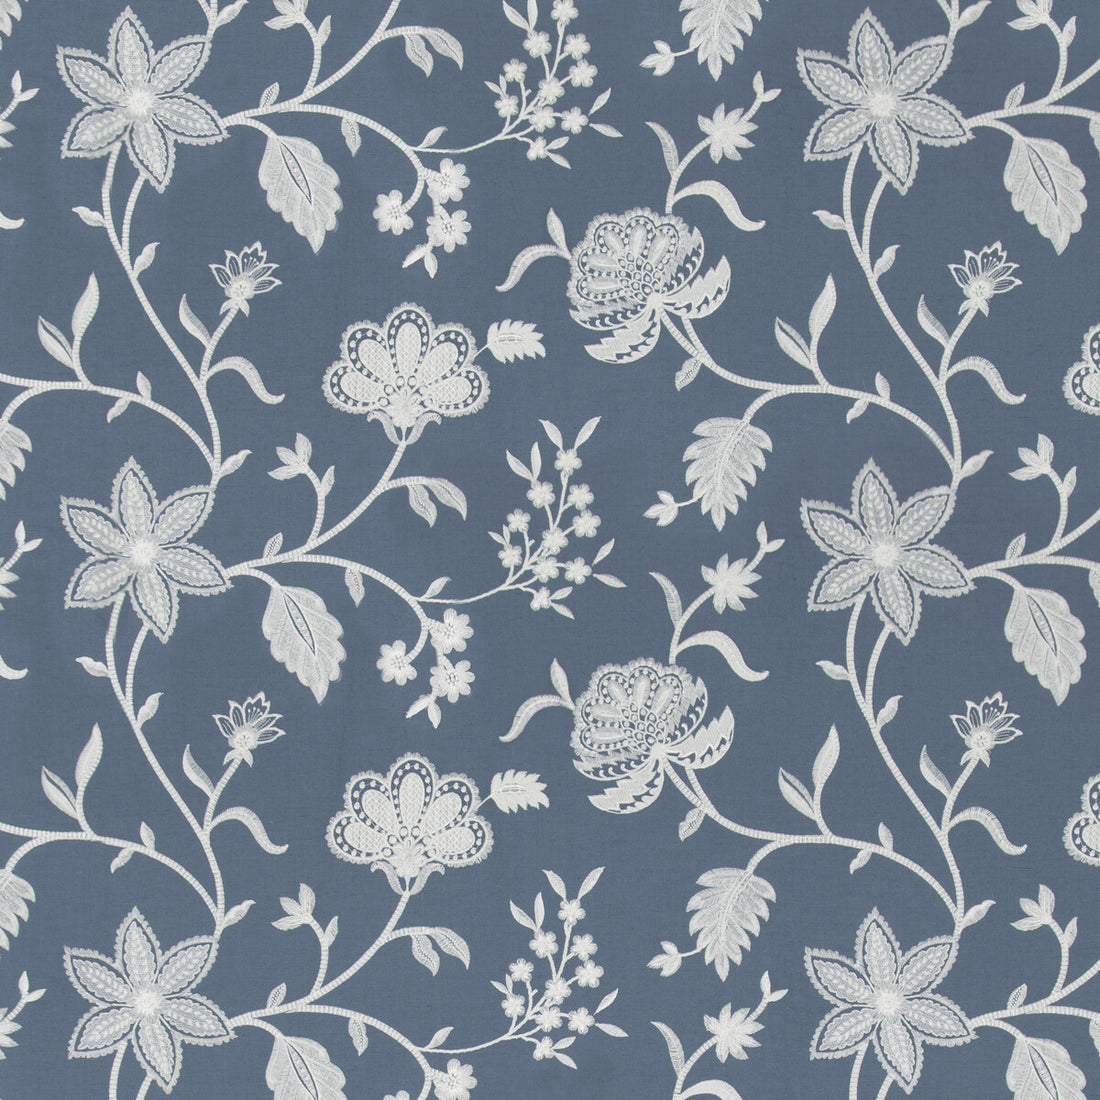 Petherton fabric in blue color - pattern PF50504.660.0 - by Baker Lifestyle in the Bridport collection